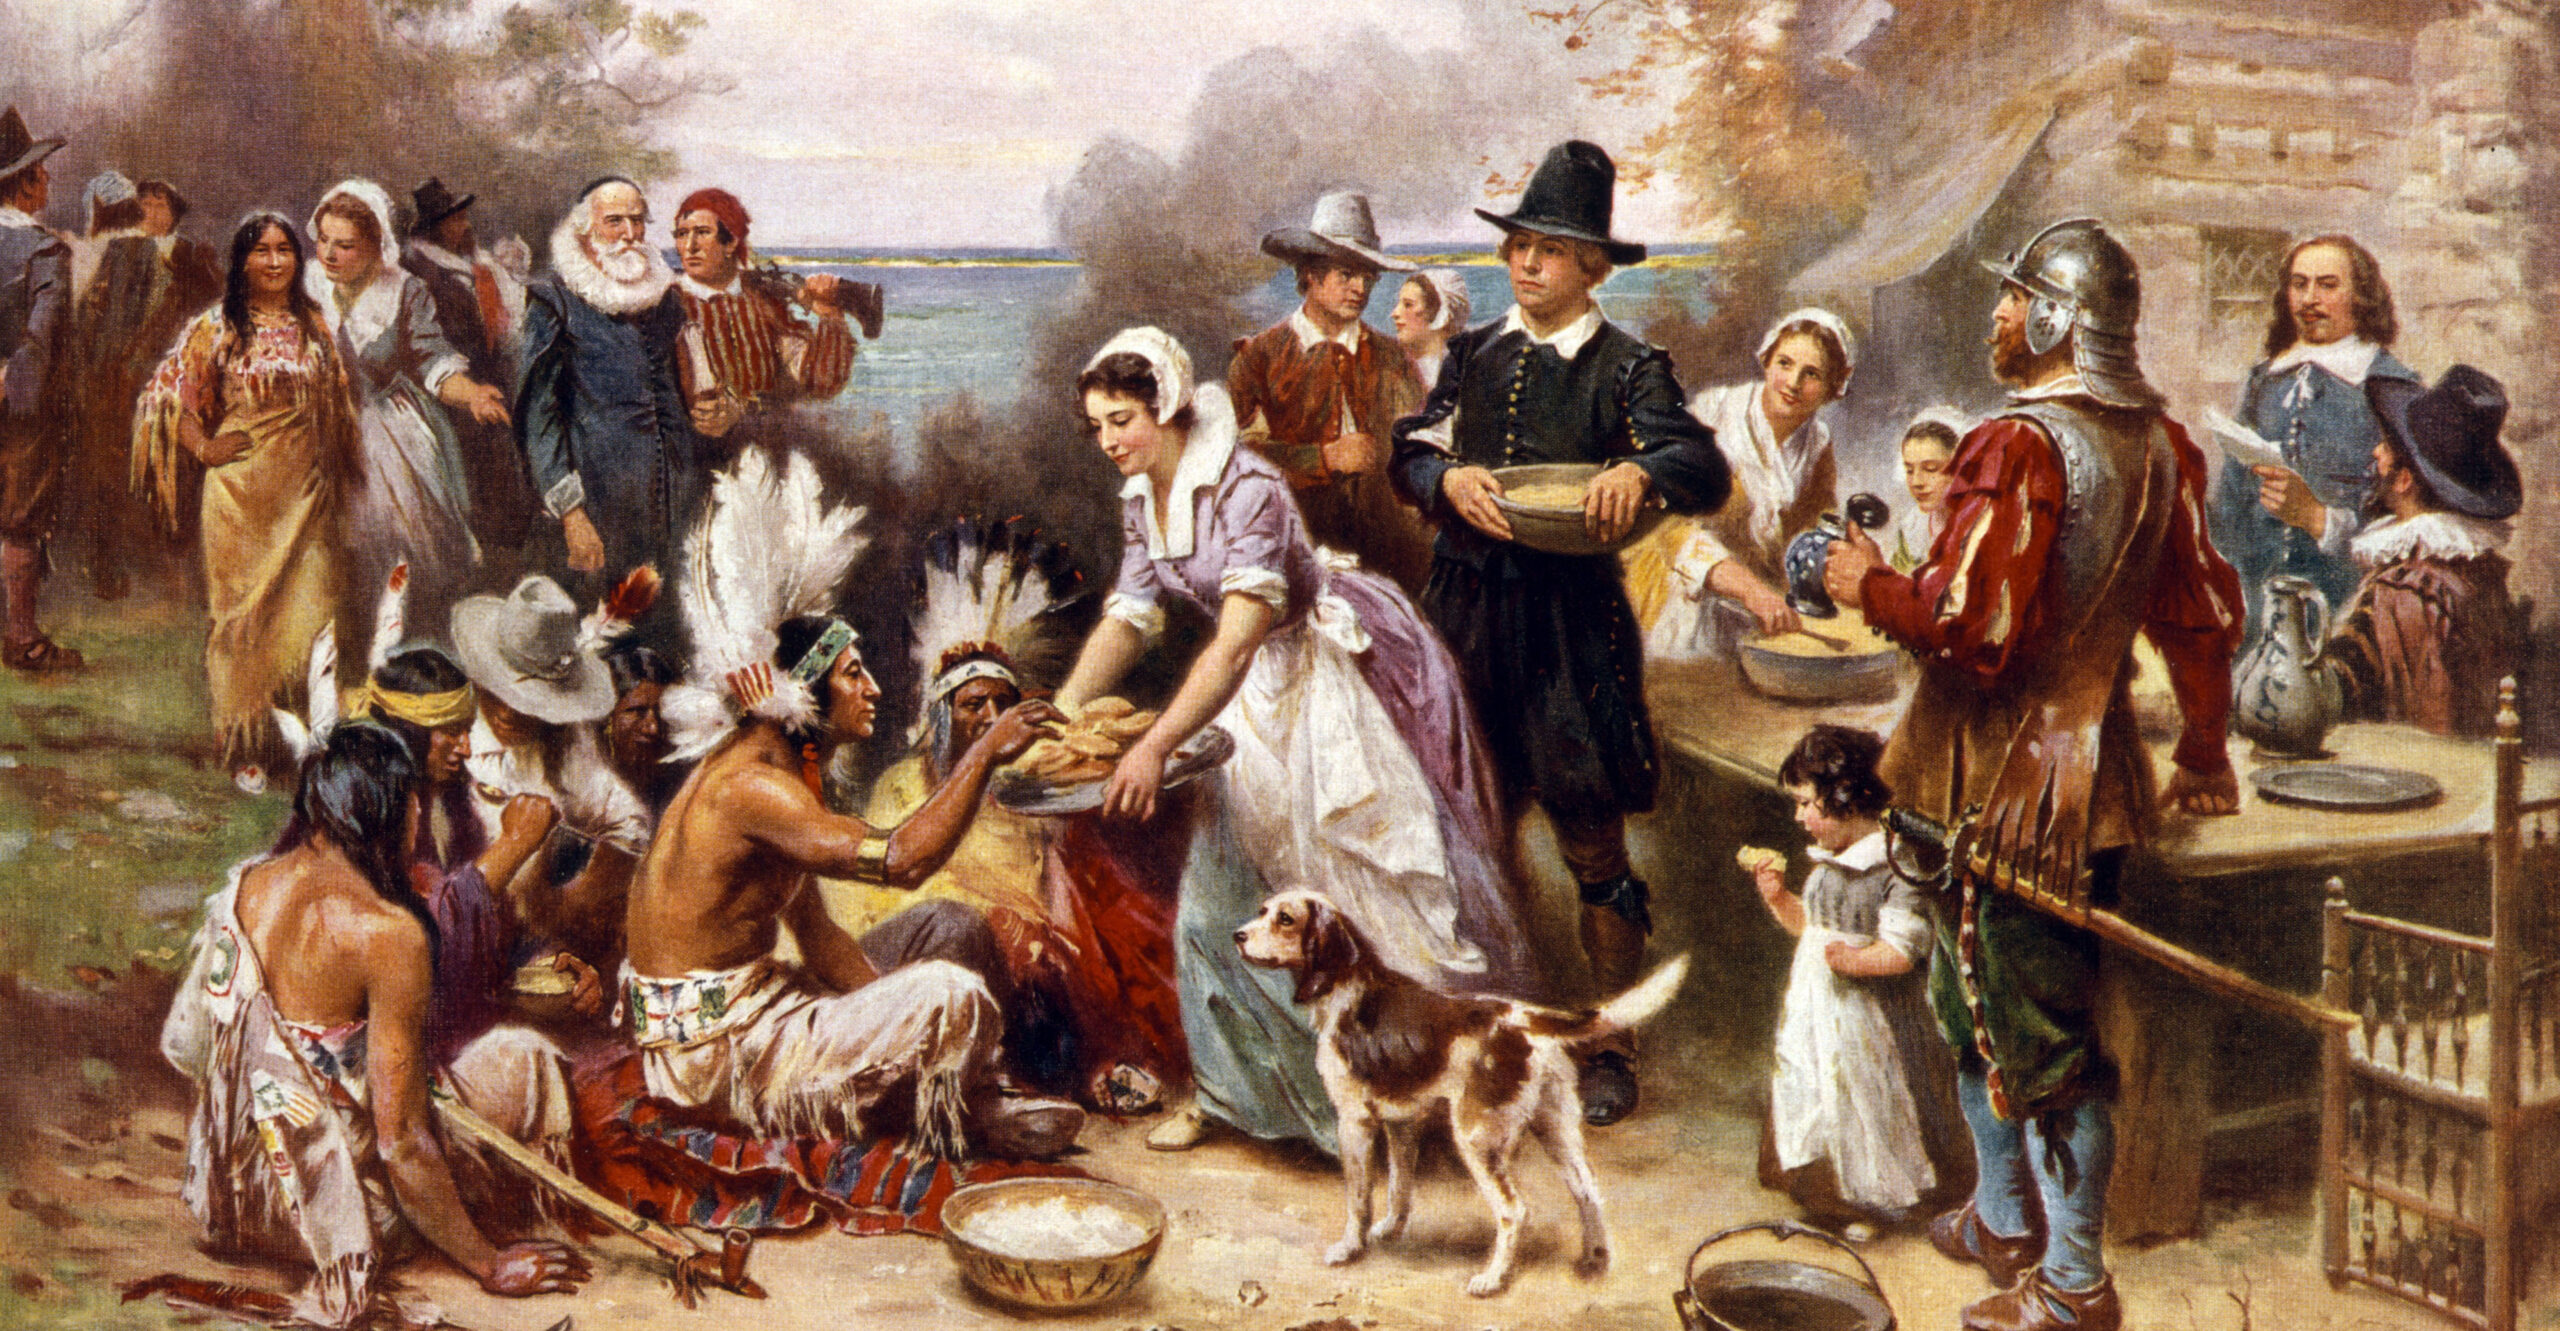 Students at Maryland High School Shown Thanksgiving Video Depicting Pilgrims as Oppressors (Flashback)